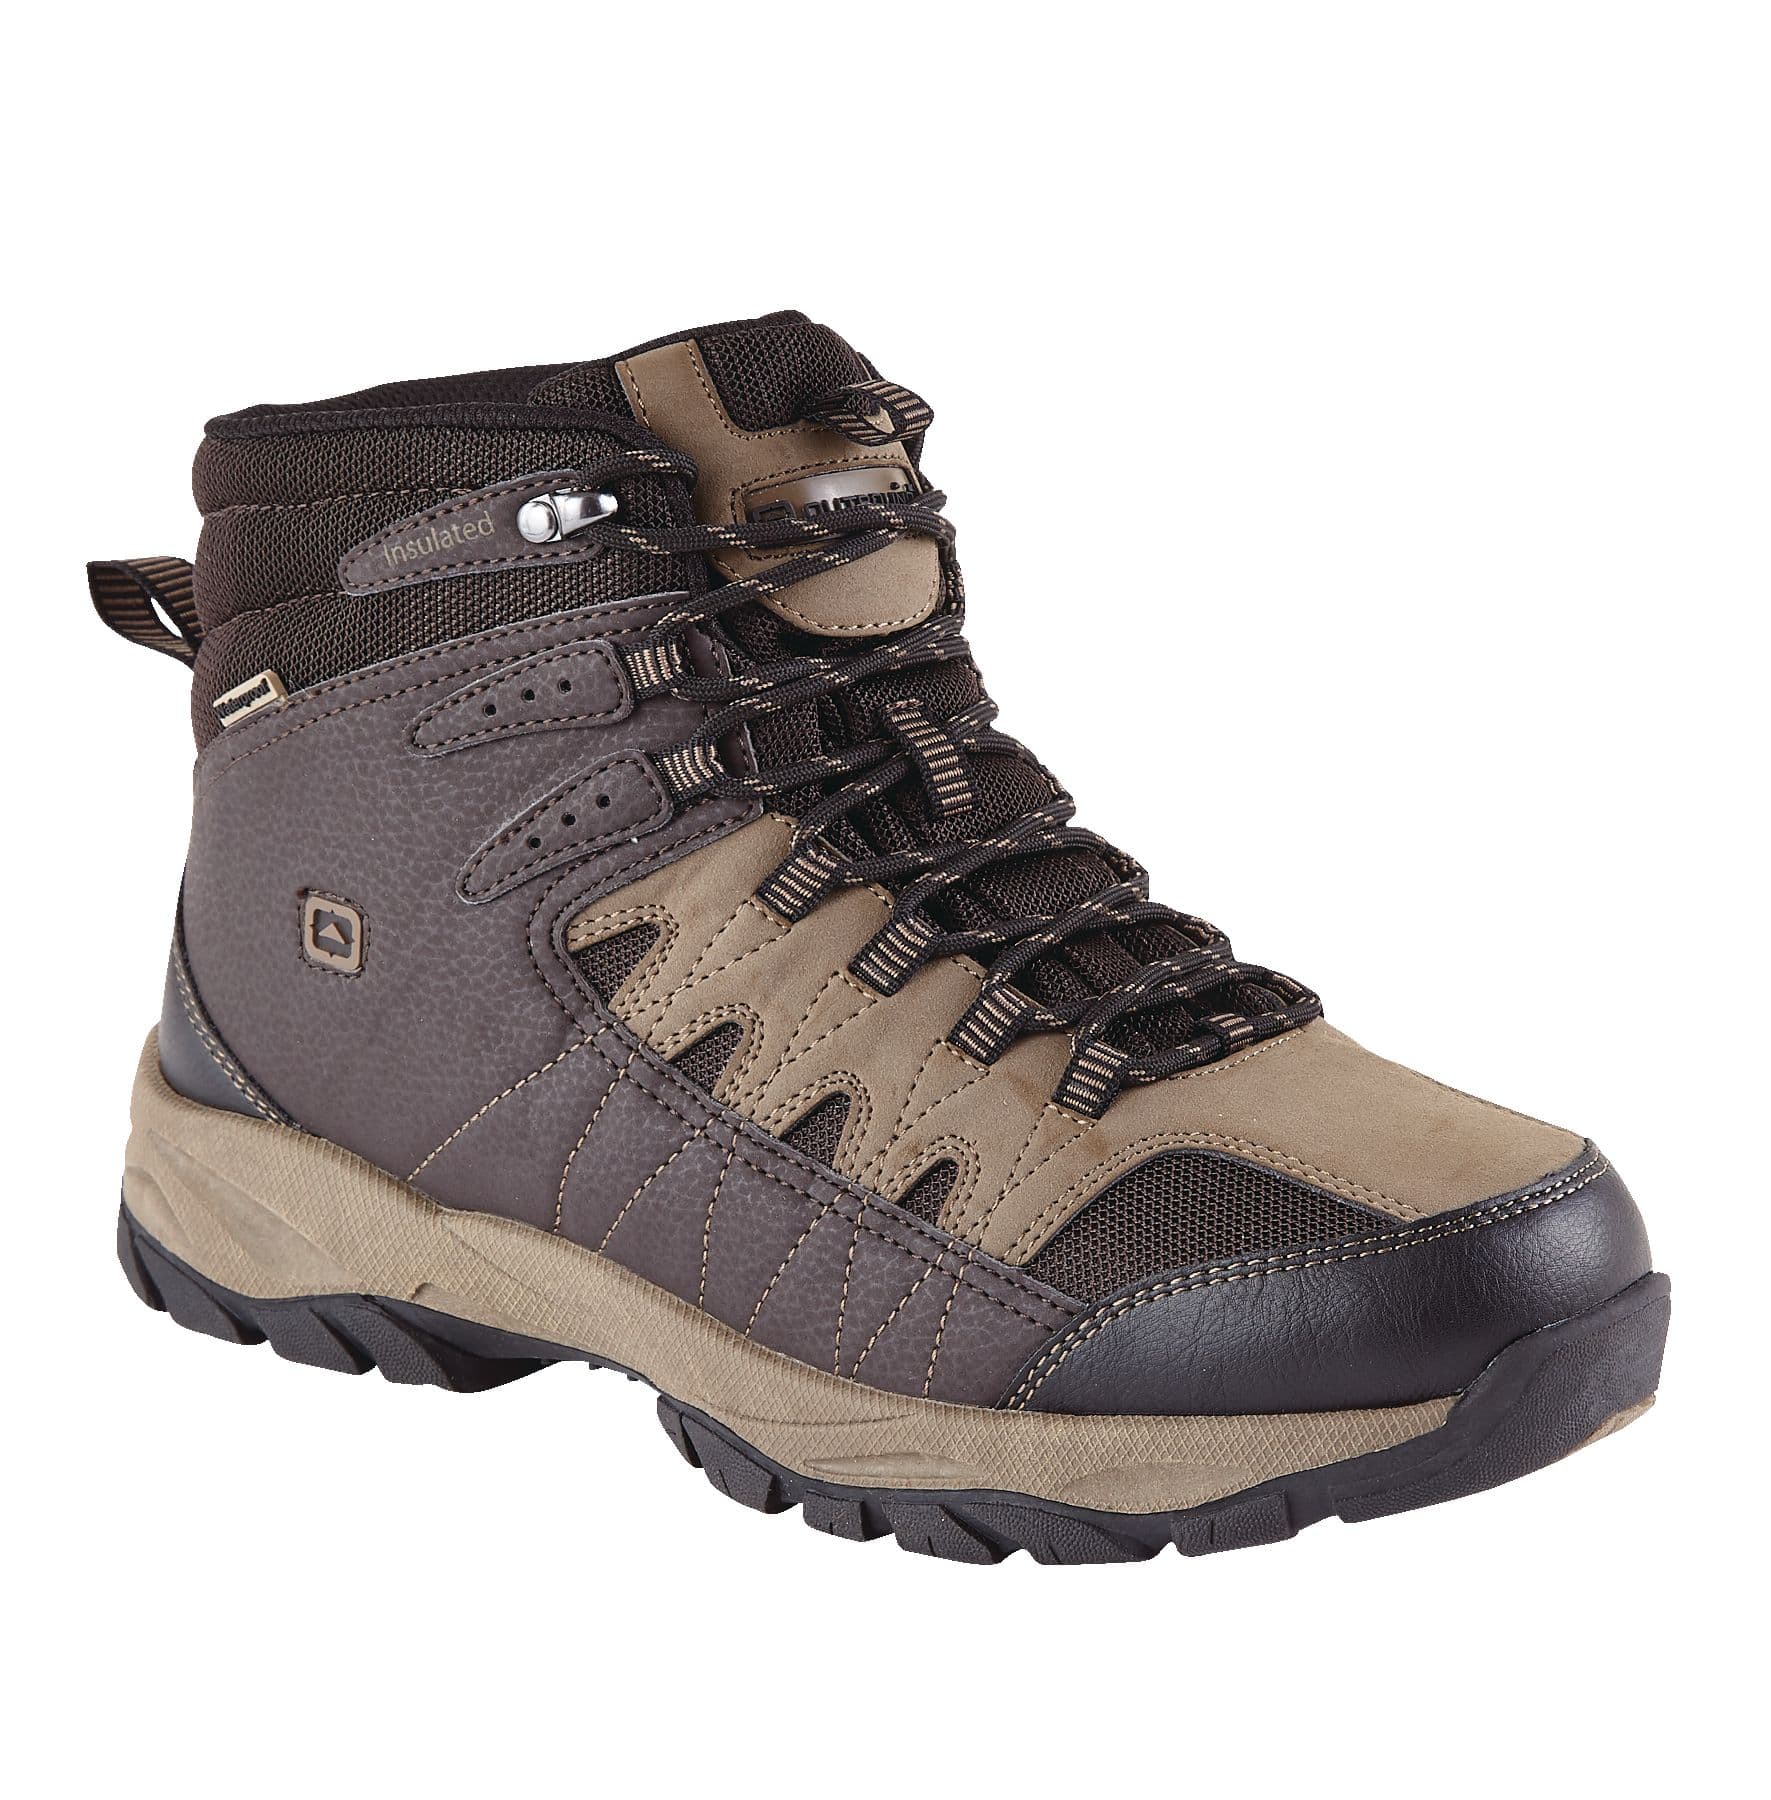 Outbound Guide Insulated Hiking Boots, Men, Brown